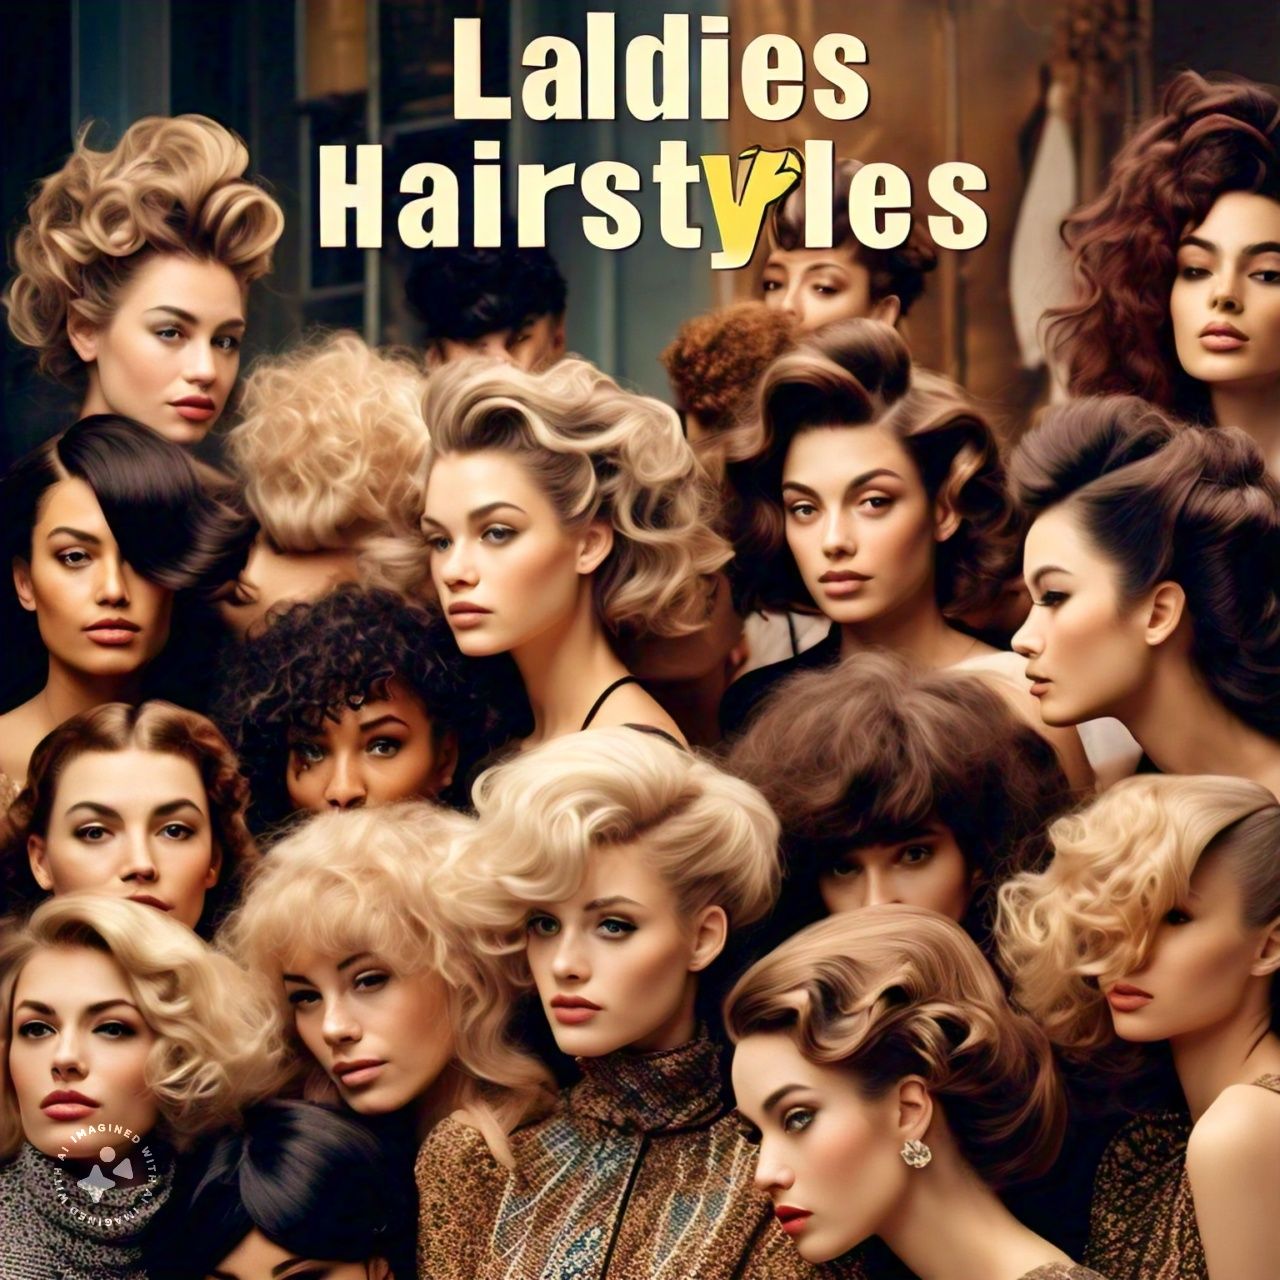 Discover the Latest Ladies Hairstyles: Trends, Tips, and Inspiration